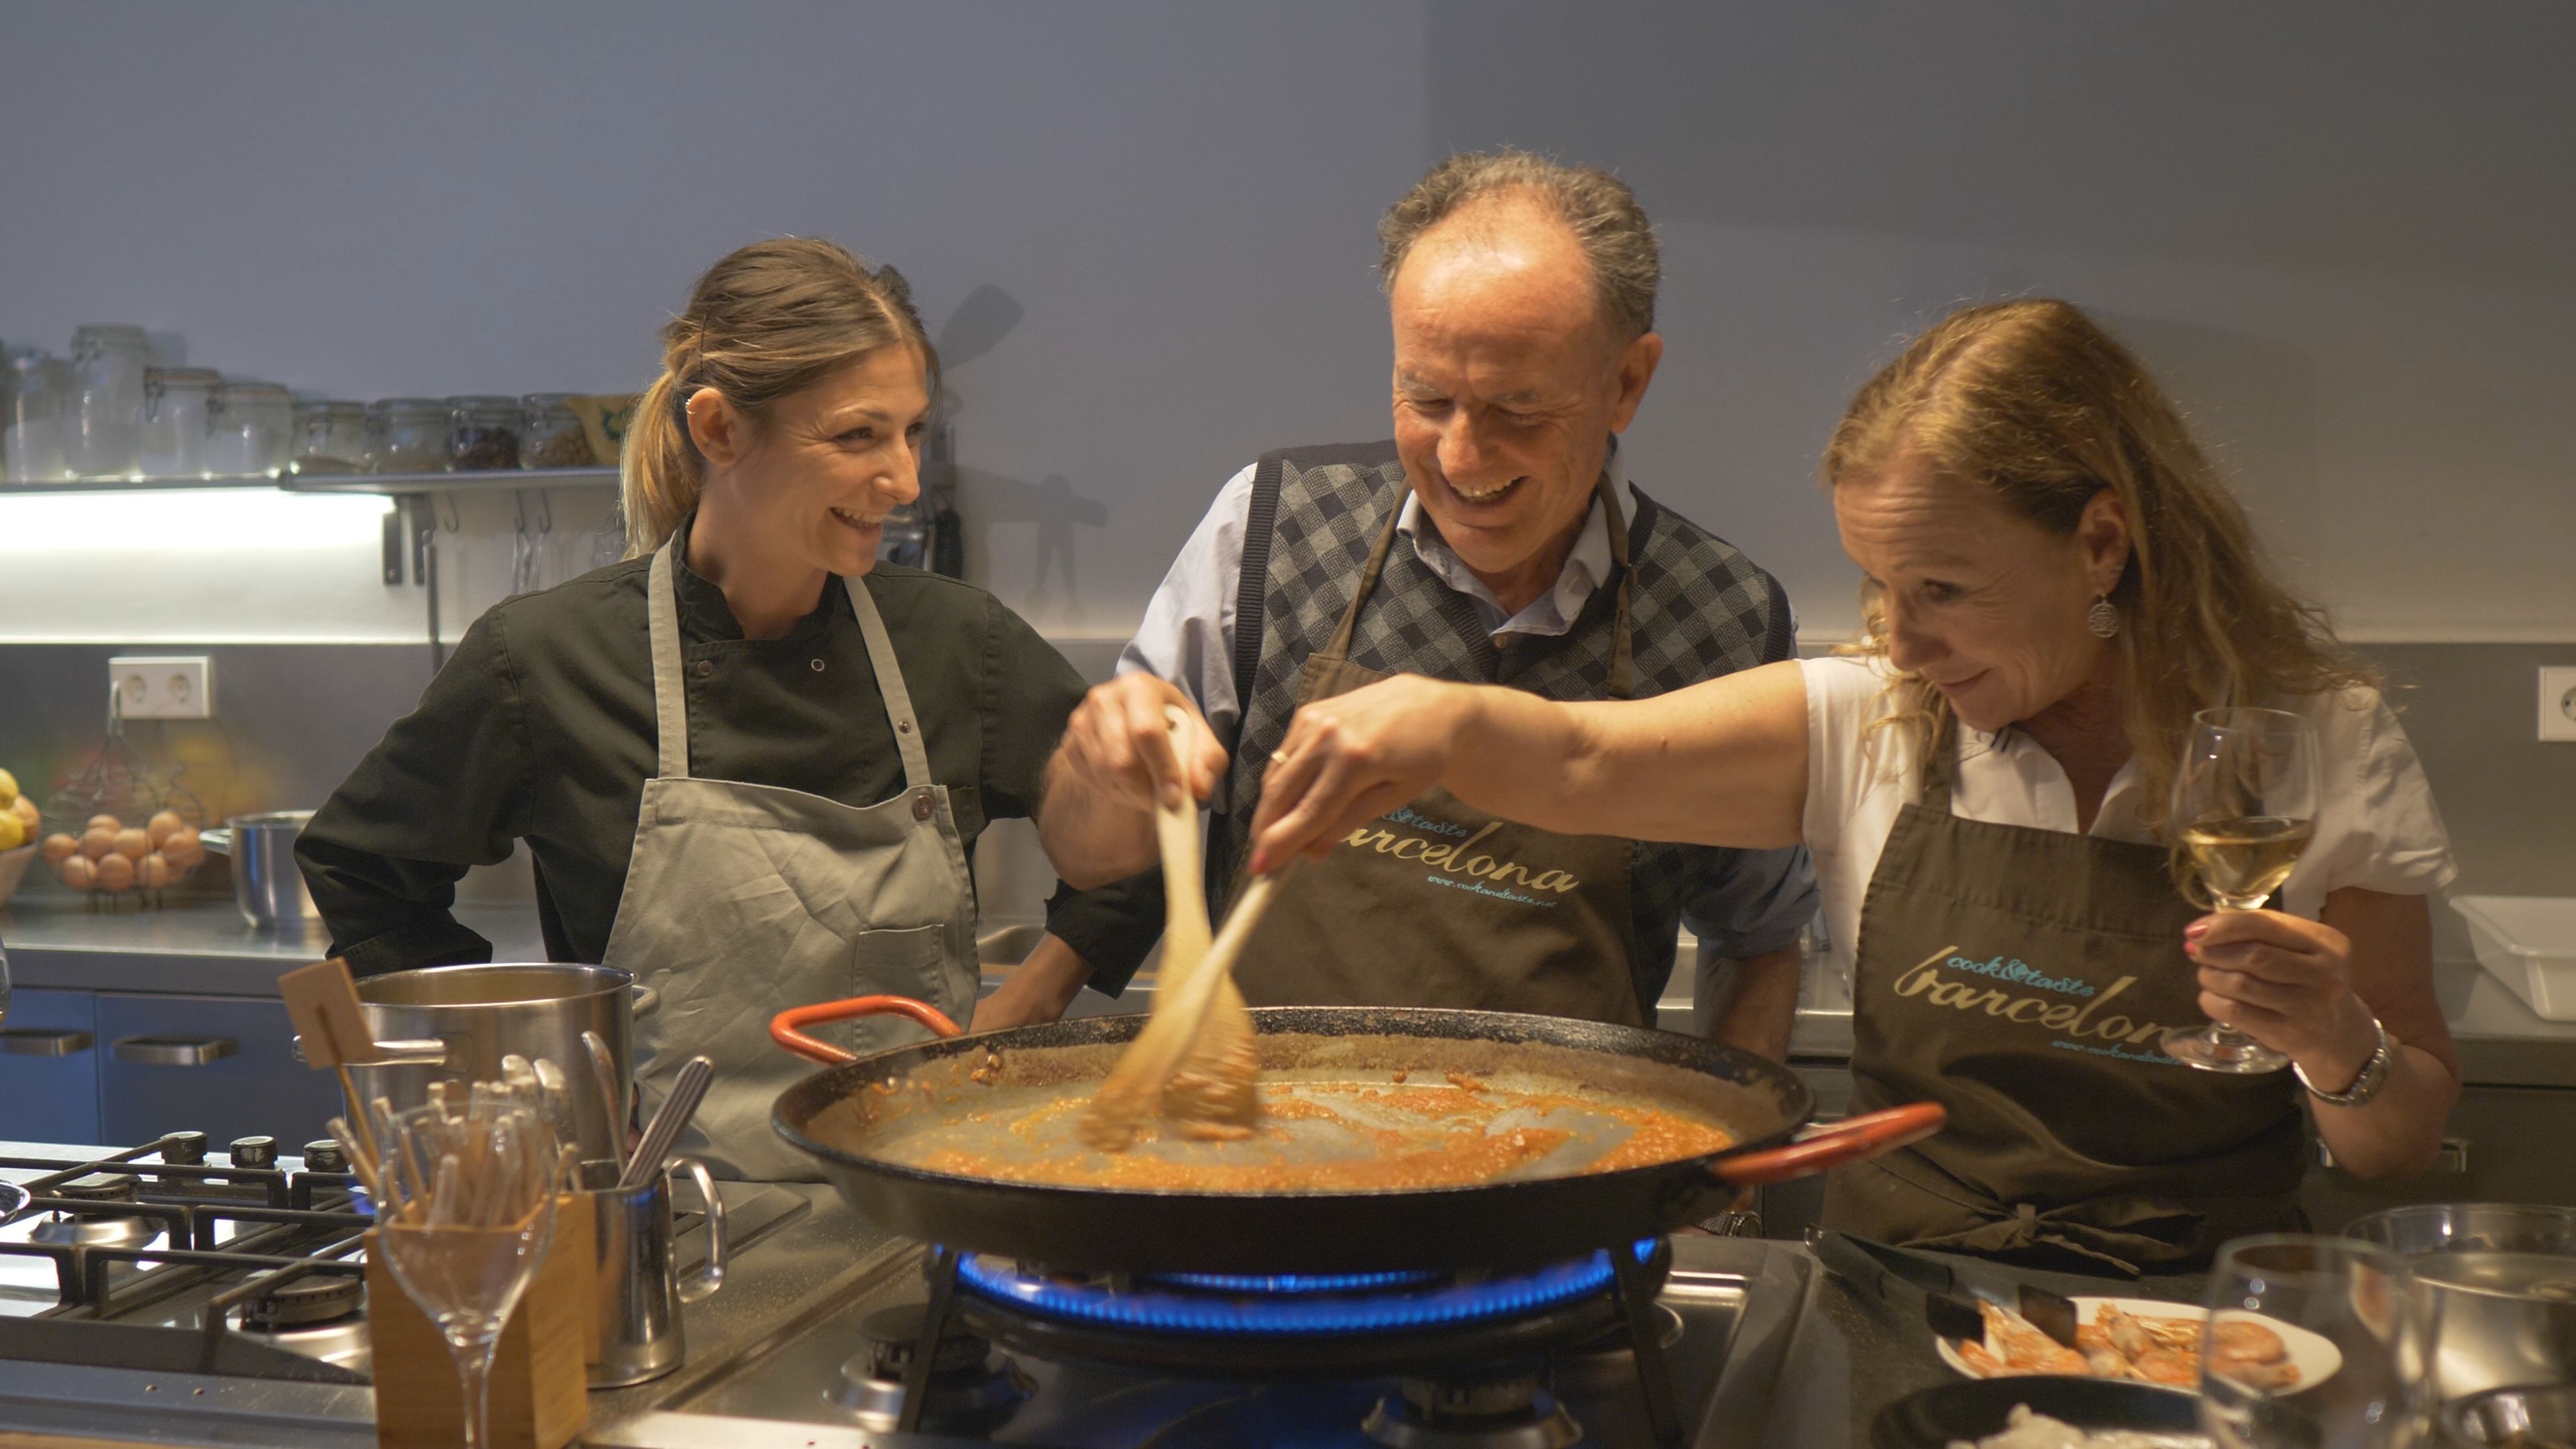 Cooking class in Barcelona